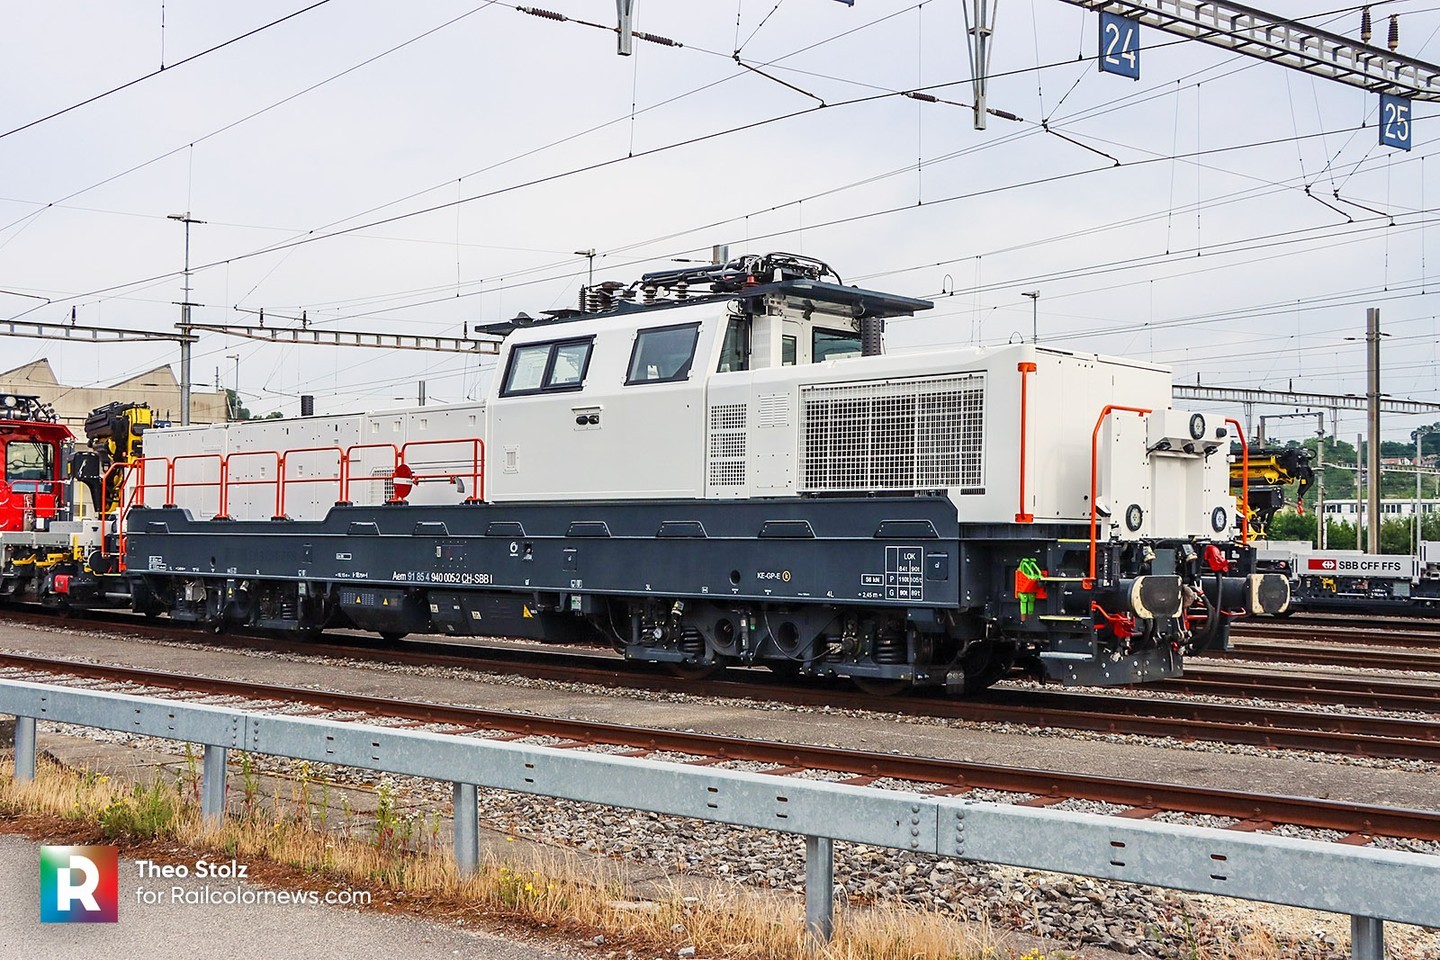 📷 by Theo Stolz 🇨🇭 Snow White: Check out the Prima H4 for Sersa Group ⬆️ Find out more on RailcolorNews.com
.
.
.
.
.
#Sersa #AlstomPrimaH4 #Alstom #PrimaH4 #railcolor #shuntinglocomotive #dualmode #rangierlokomotive #railcolornews #railways #railways_of_europe #eisenbahn #hybrid #hybridlocomotive #rangierlok #swisstrains #railways_of_europe #railways_of_switzerland #Lausanne #Aem940 #Aem940005 #940005 #SersaGroup #SnowWhite